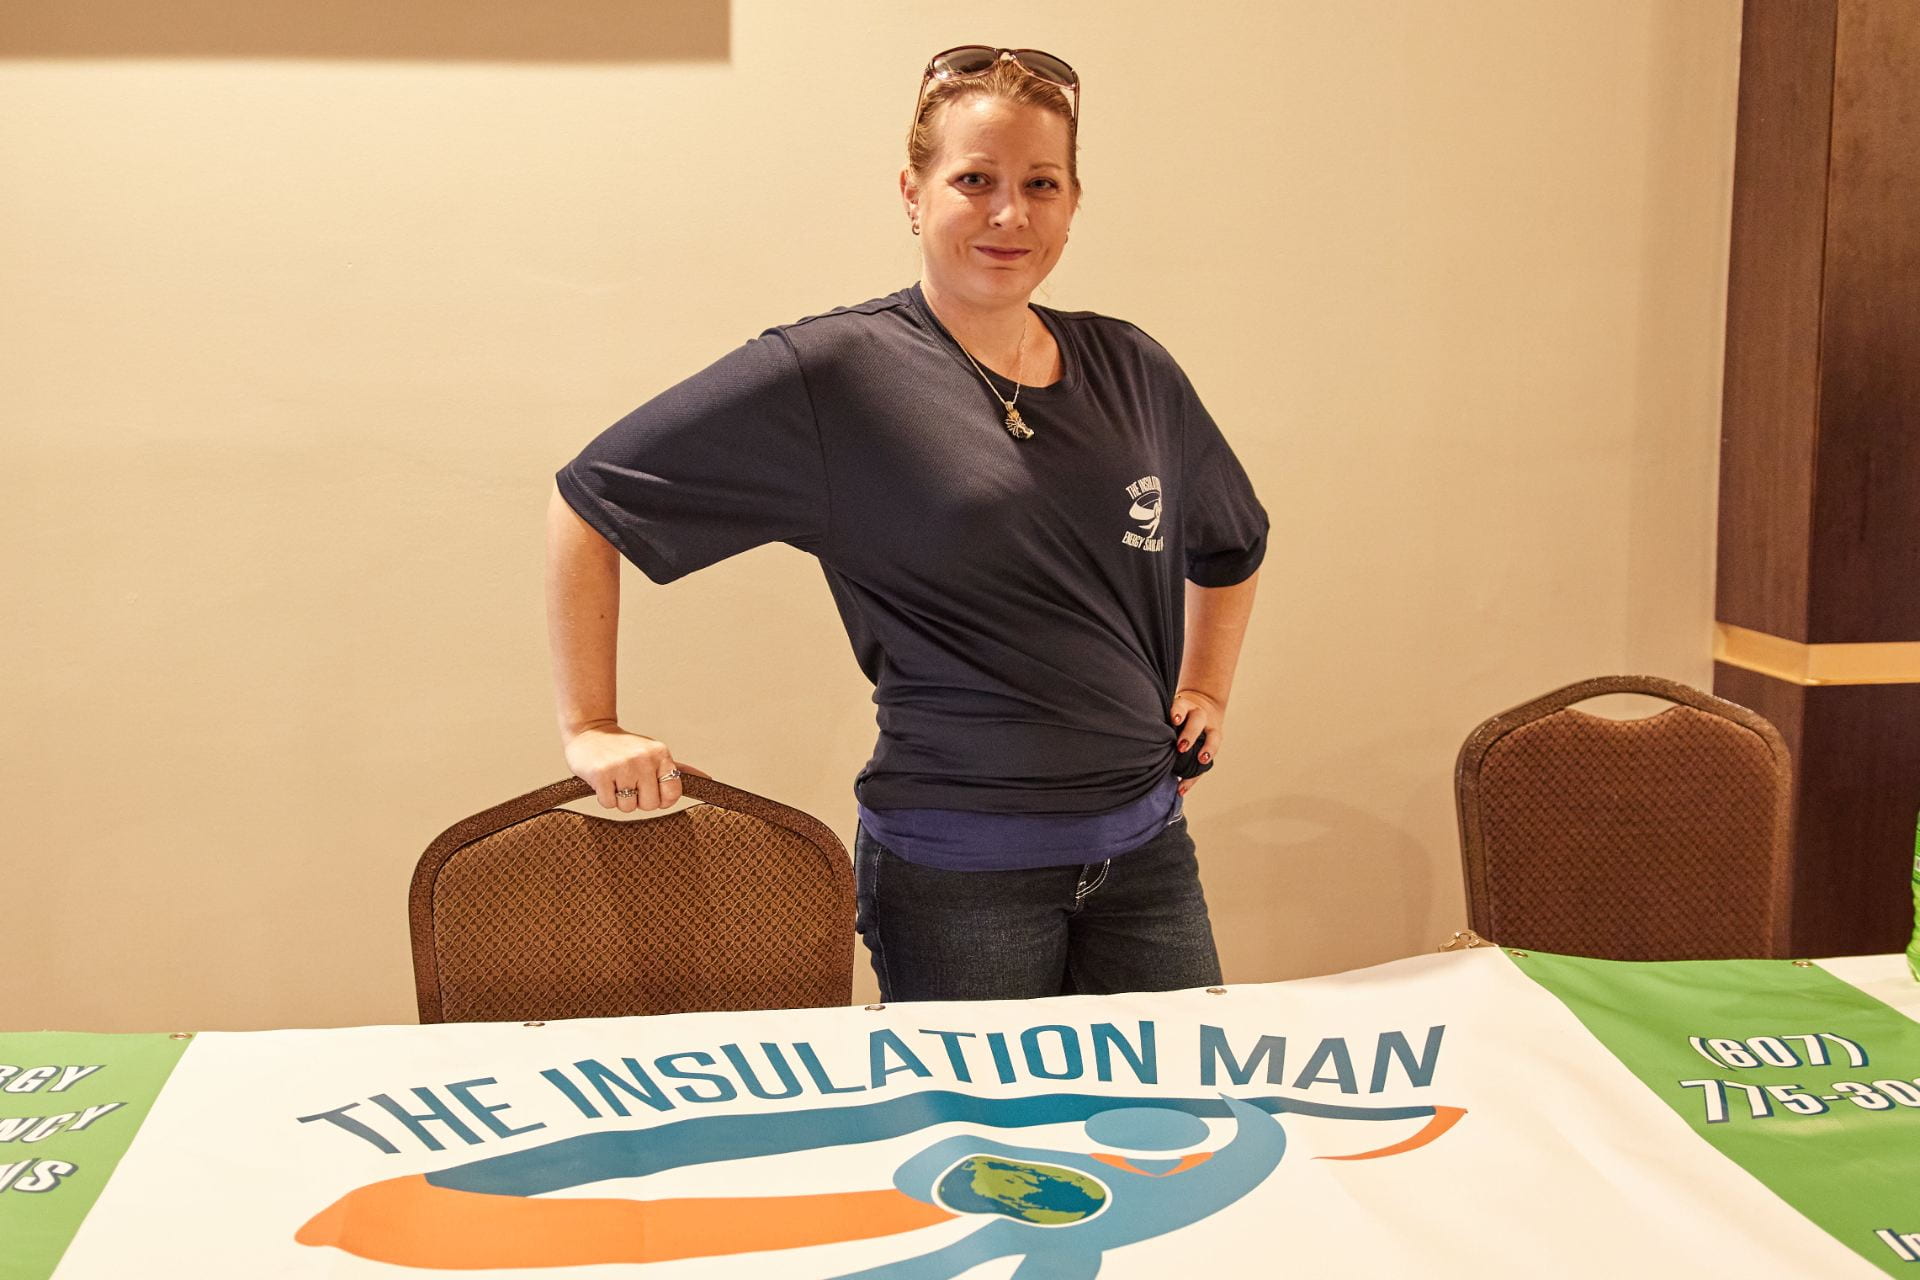 A woman in a blue top with sunglasses on her head smiles at the camera, with a banner on the table below her that reads "The Insulation Man"